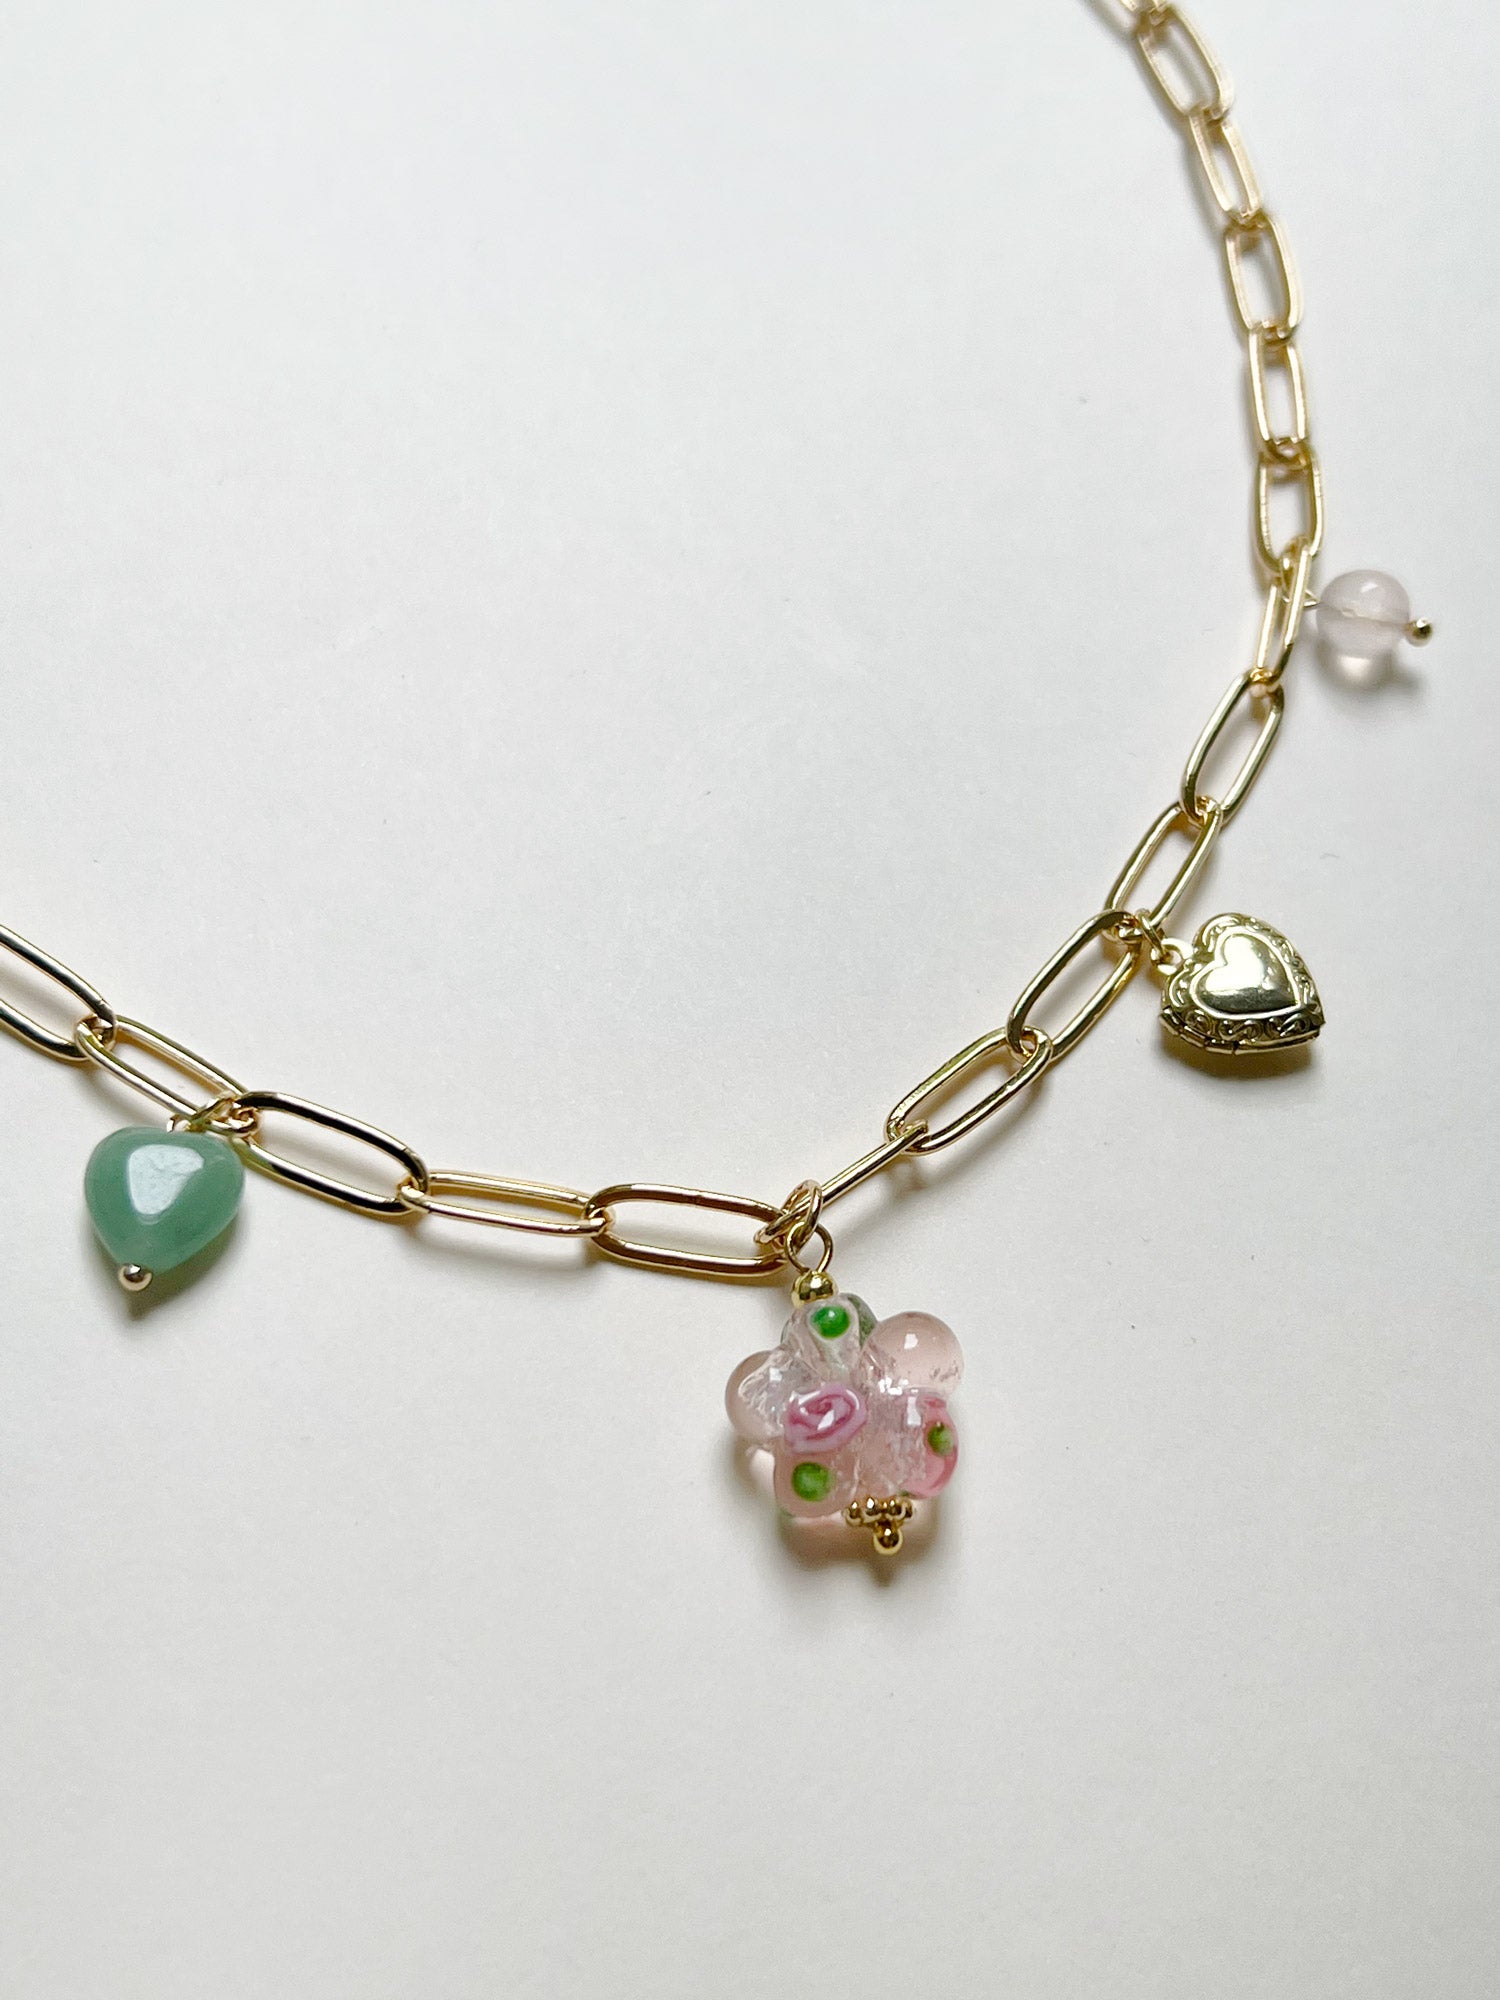 Pink Glass Flower Charm Necklace - Locket/Crystals